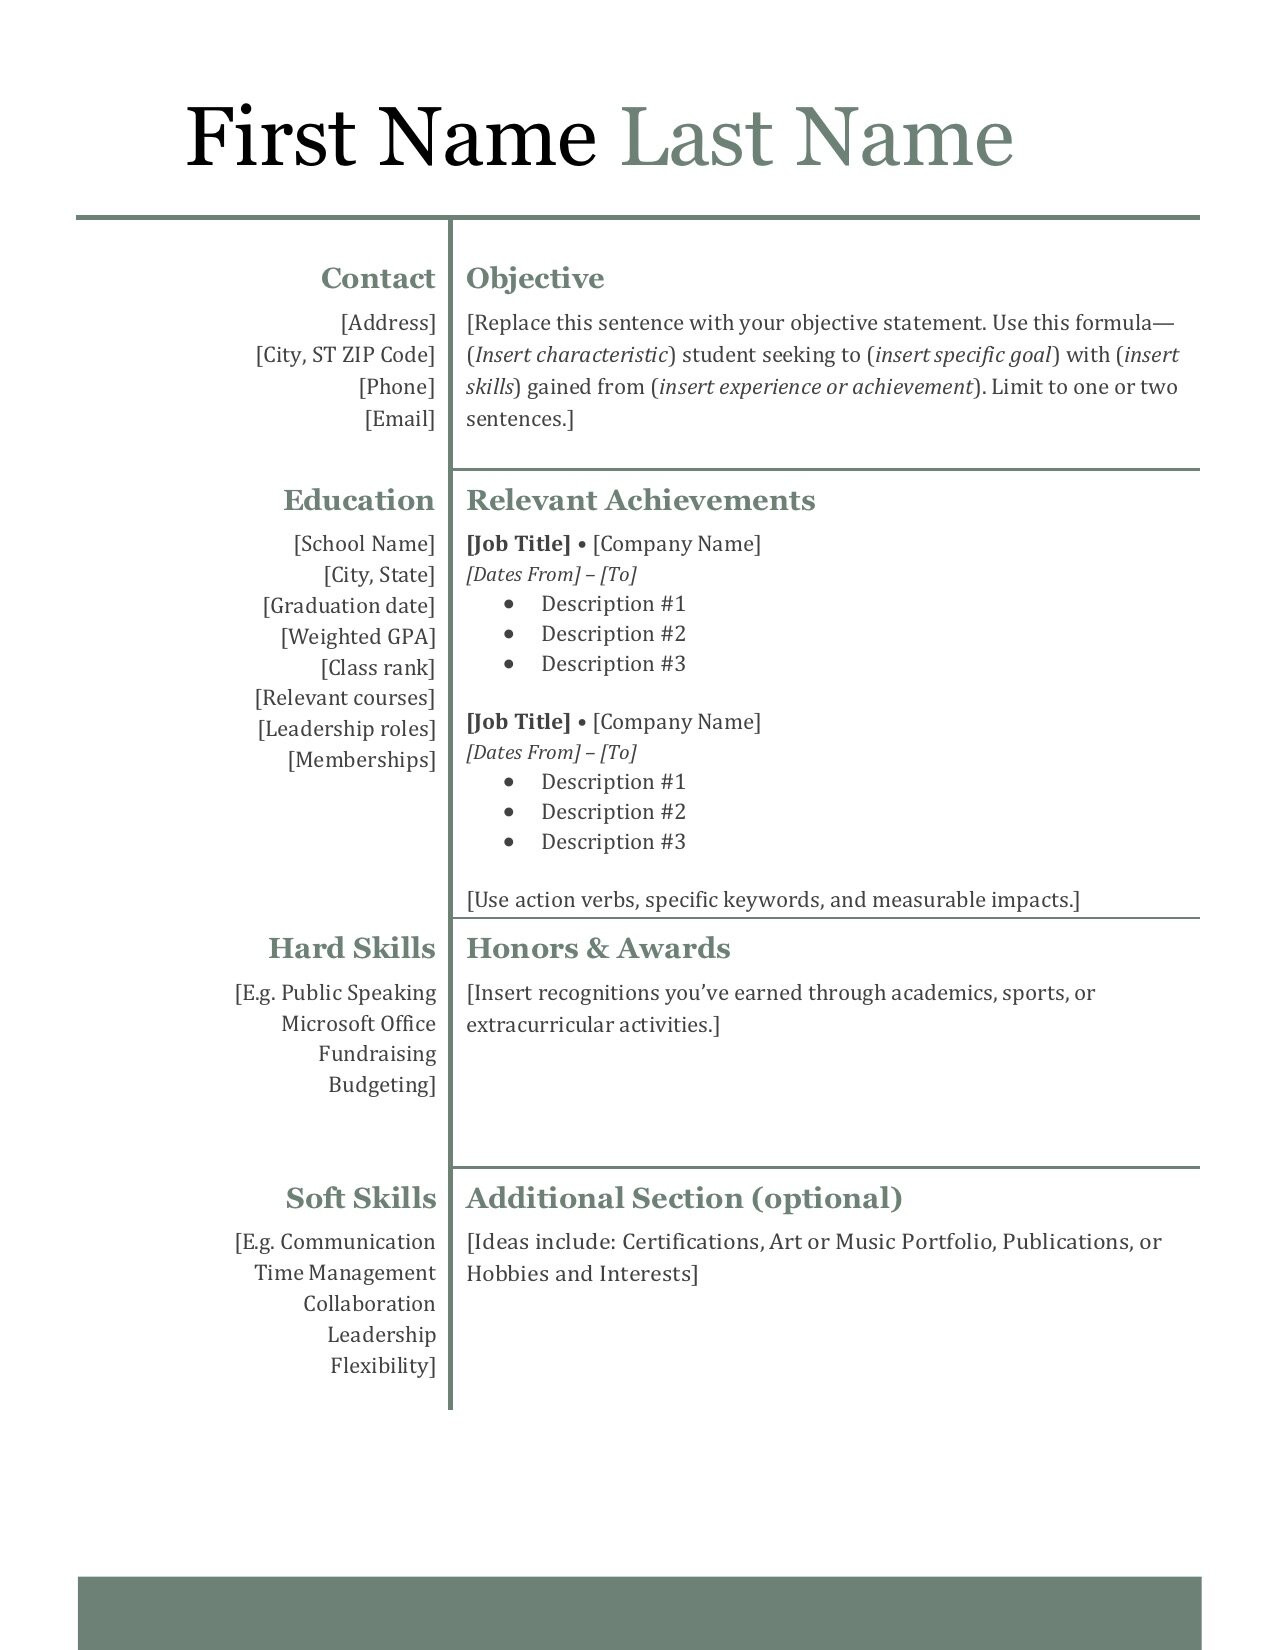 Sample High School Student Resume for College How to Write An Impressive High School Resume â Shemmassian …